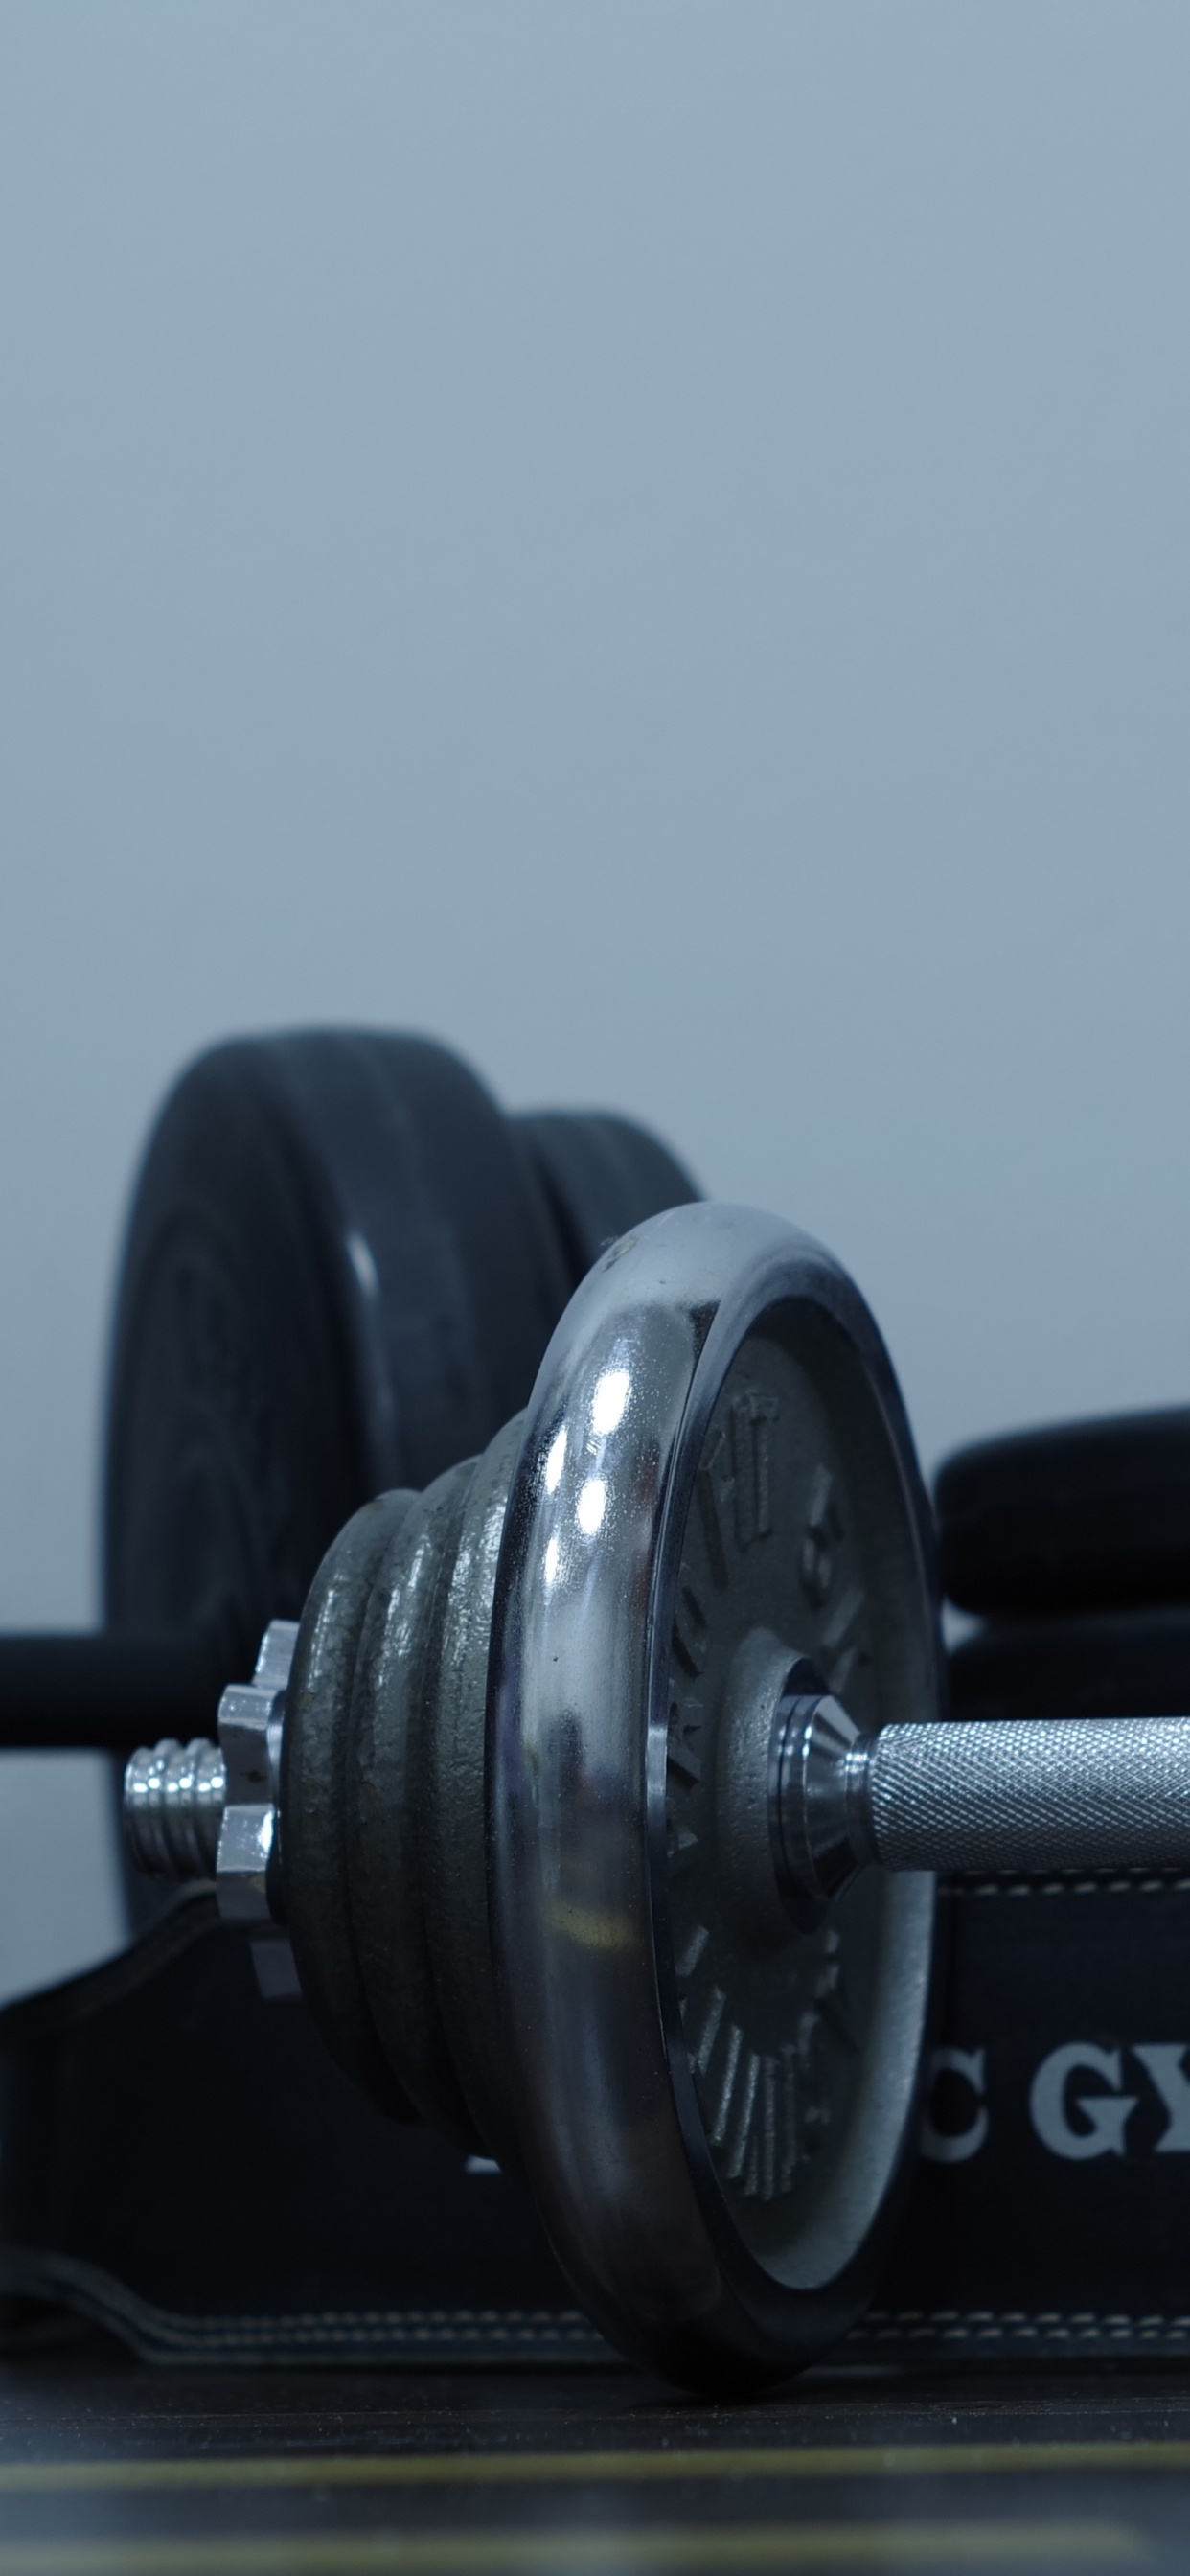 2 Black Dumbbells on Brown Wooden Table. Wallpaper in 1242x2688 Resolution